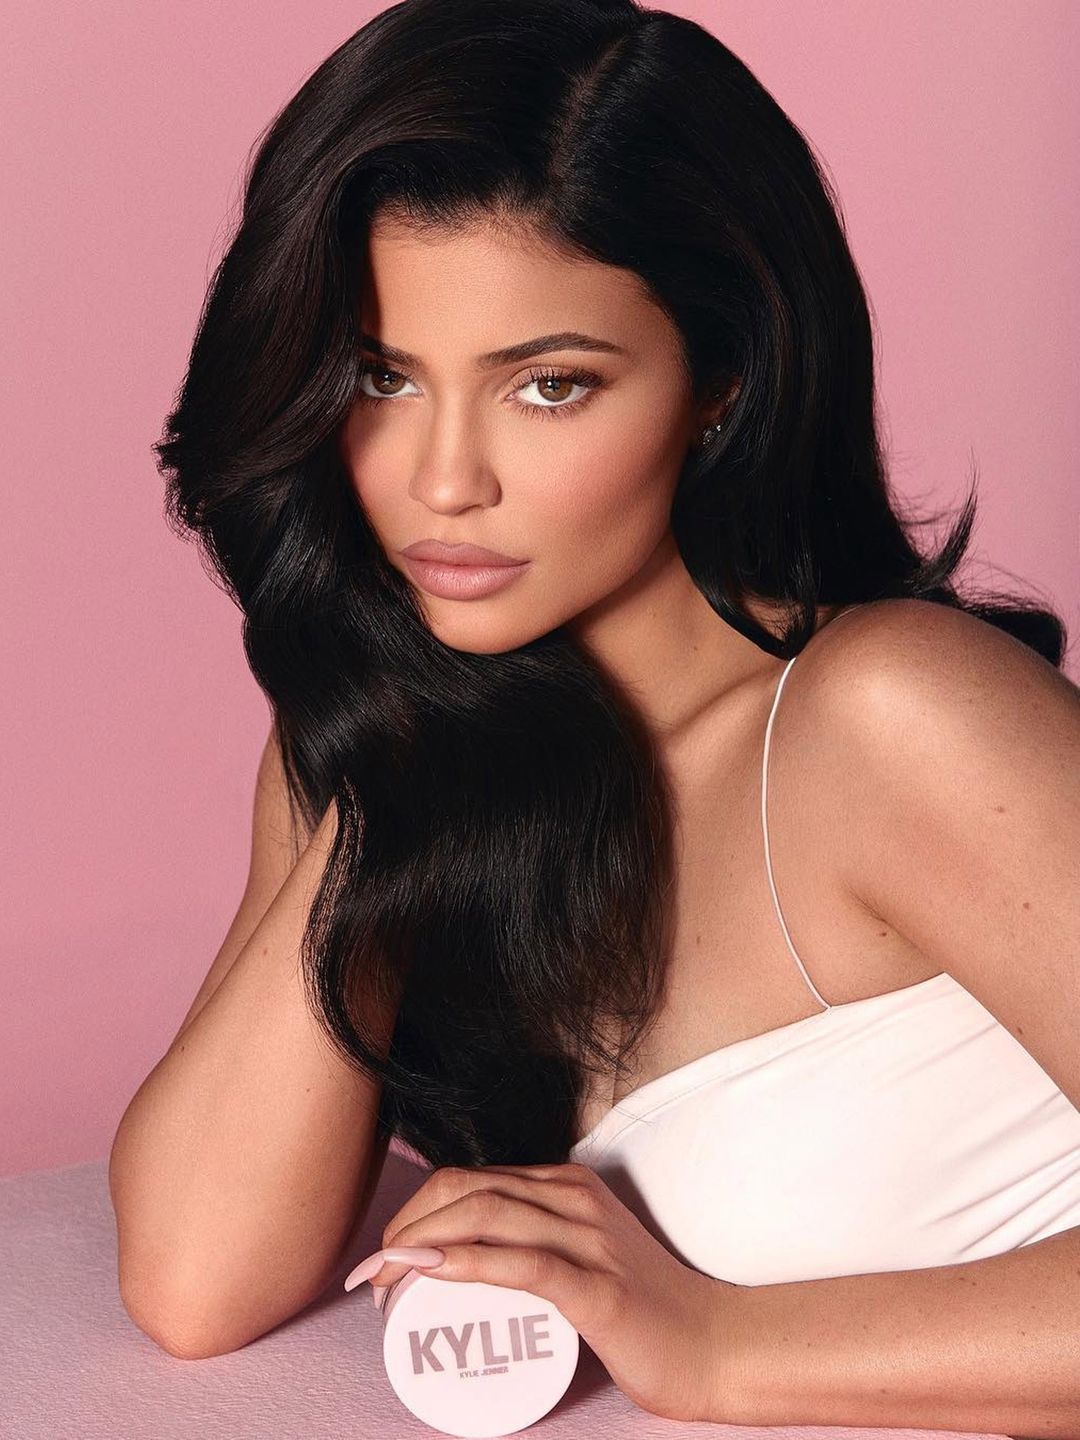 Kylie Jenner height and weight